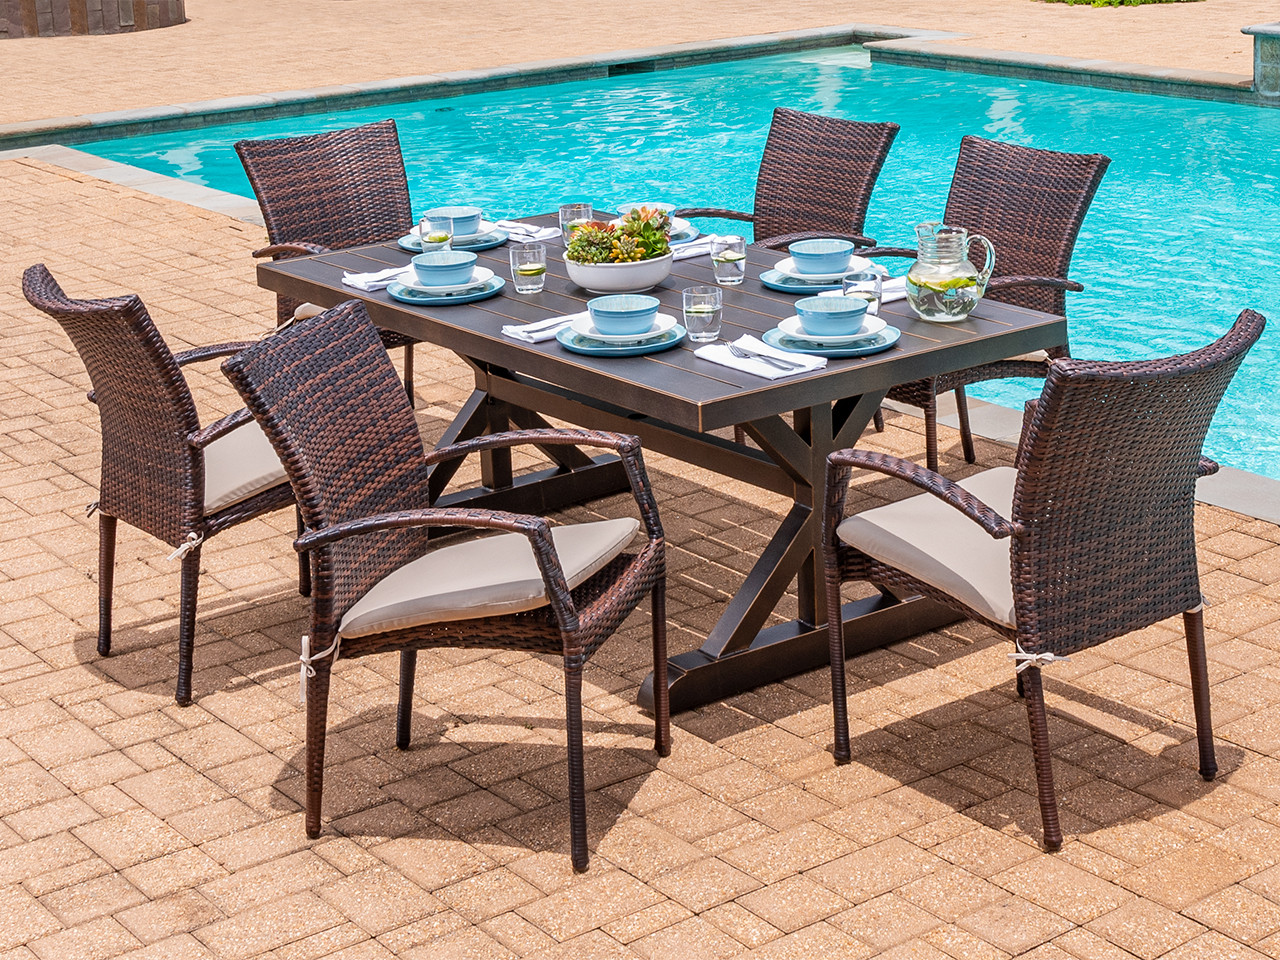 Sierra Black Gold Aluminun and Sangria Outdoor Wicker 7 Pc. Dining Set with 72 x 39 in. Dining Table